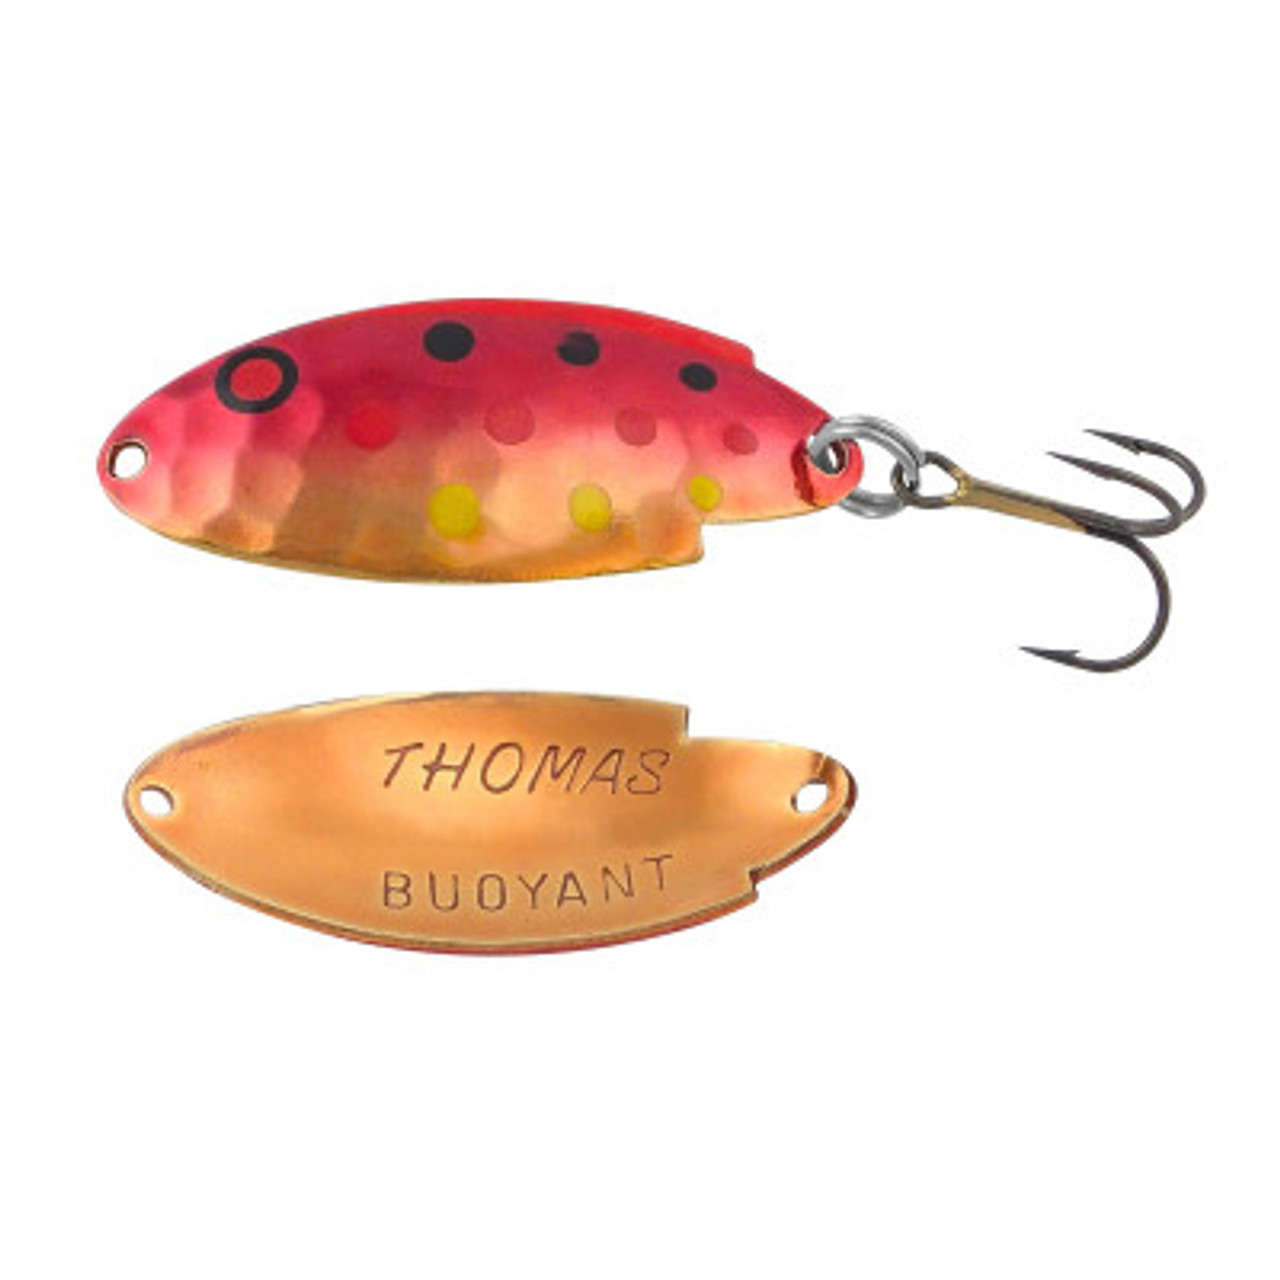 THOMAS FISHING LURES S515GR Fishing Lure, Cyclone Spoon, Gamefish, Trout,  Brass, Gold/Red Lure